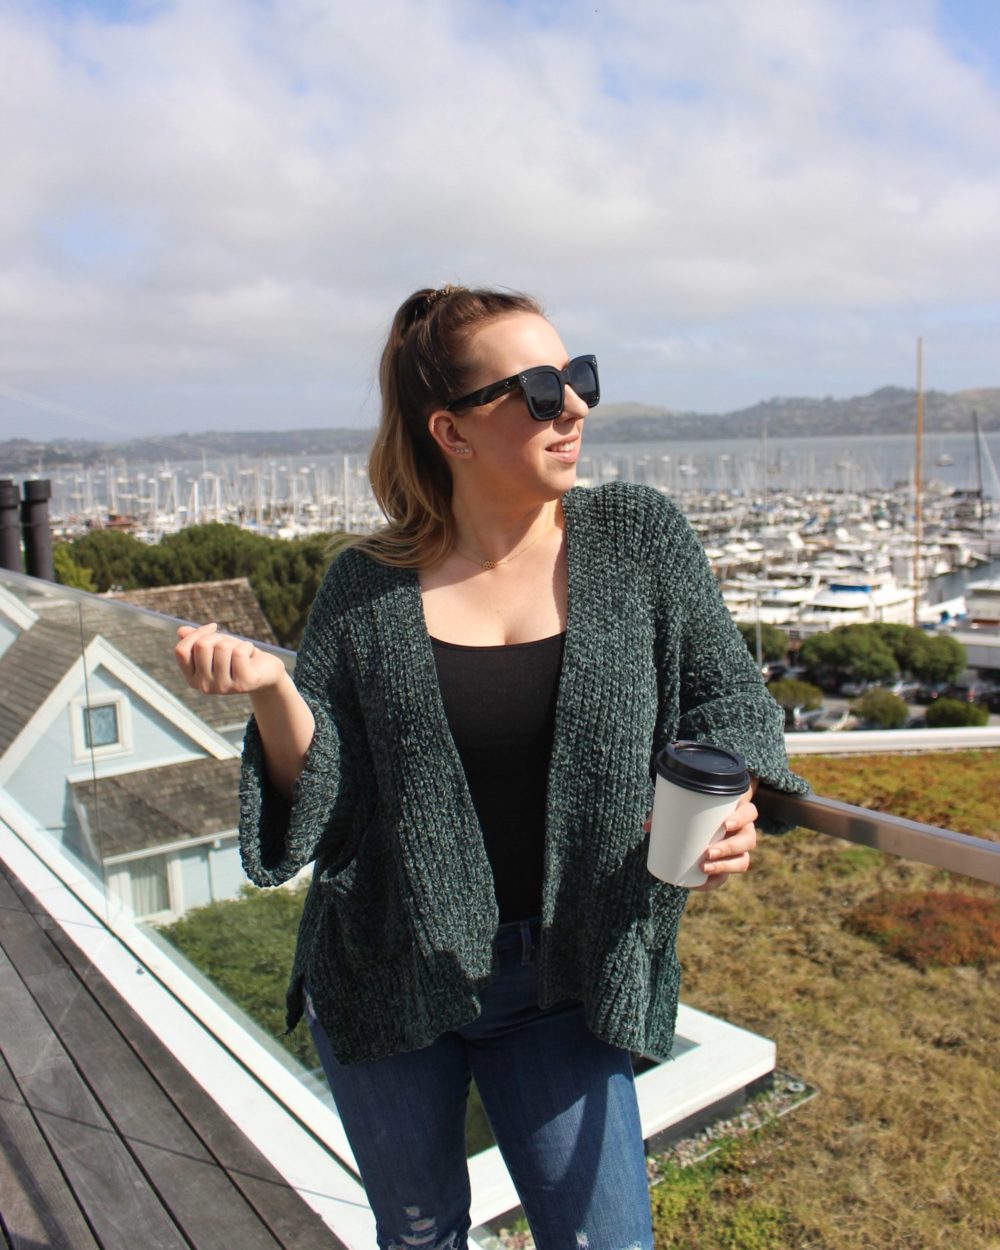 Where To Stay In Sausalito - Casa Madrona Hotel and Spa